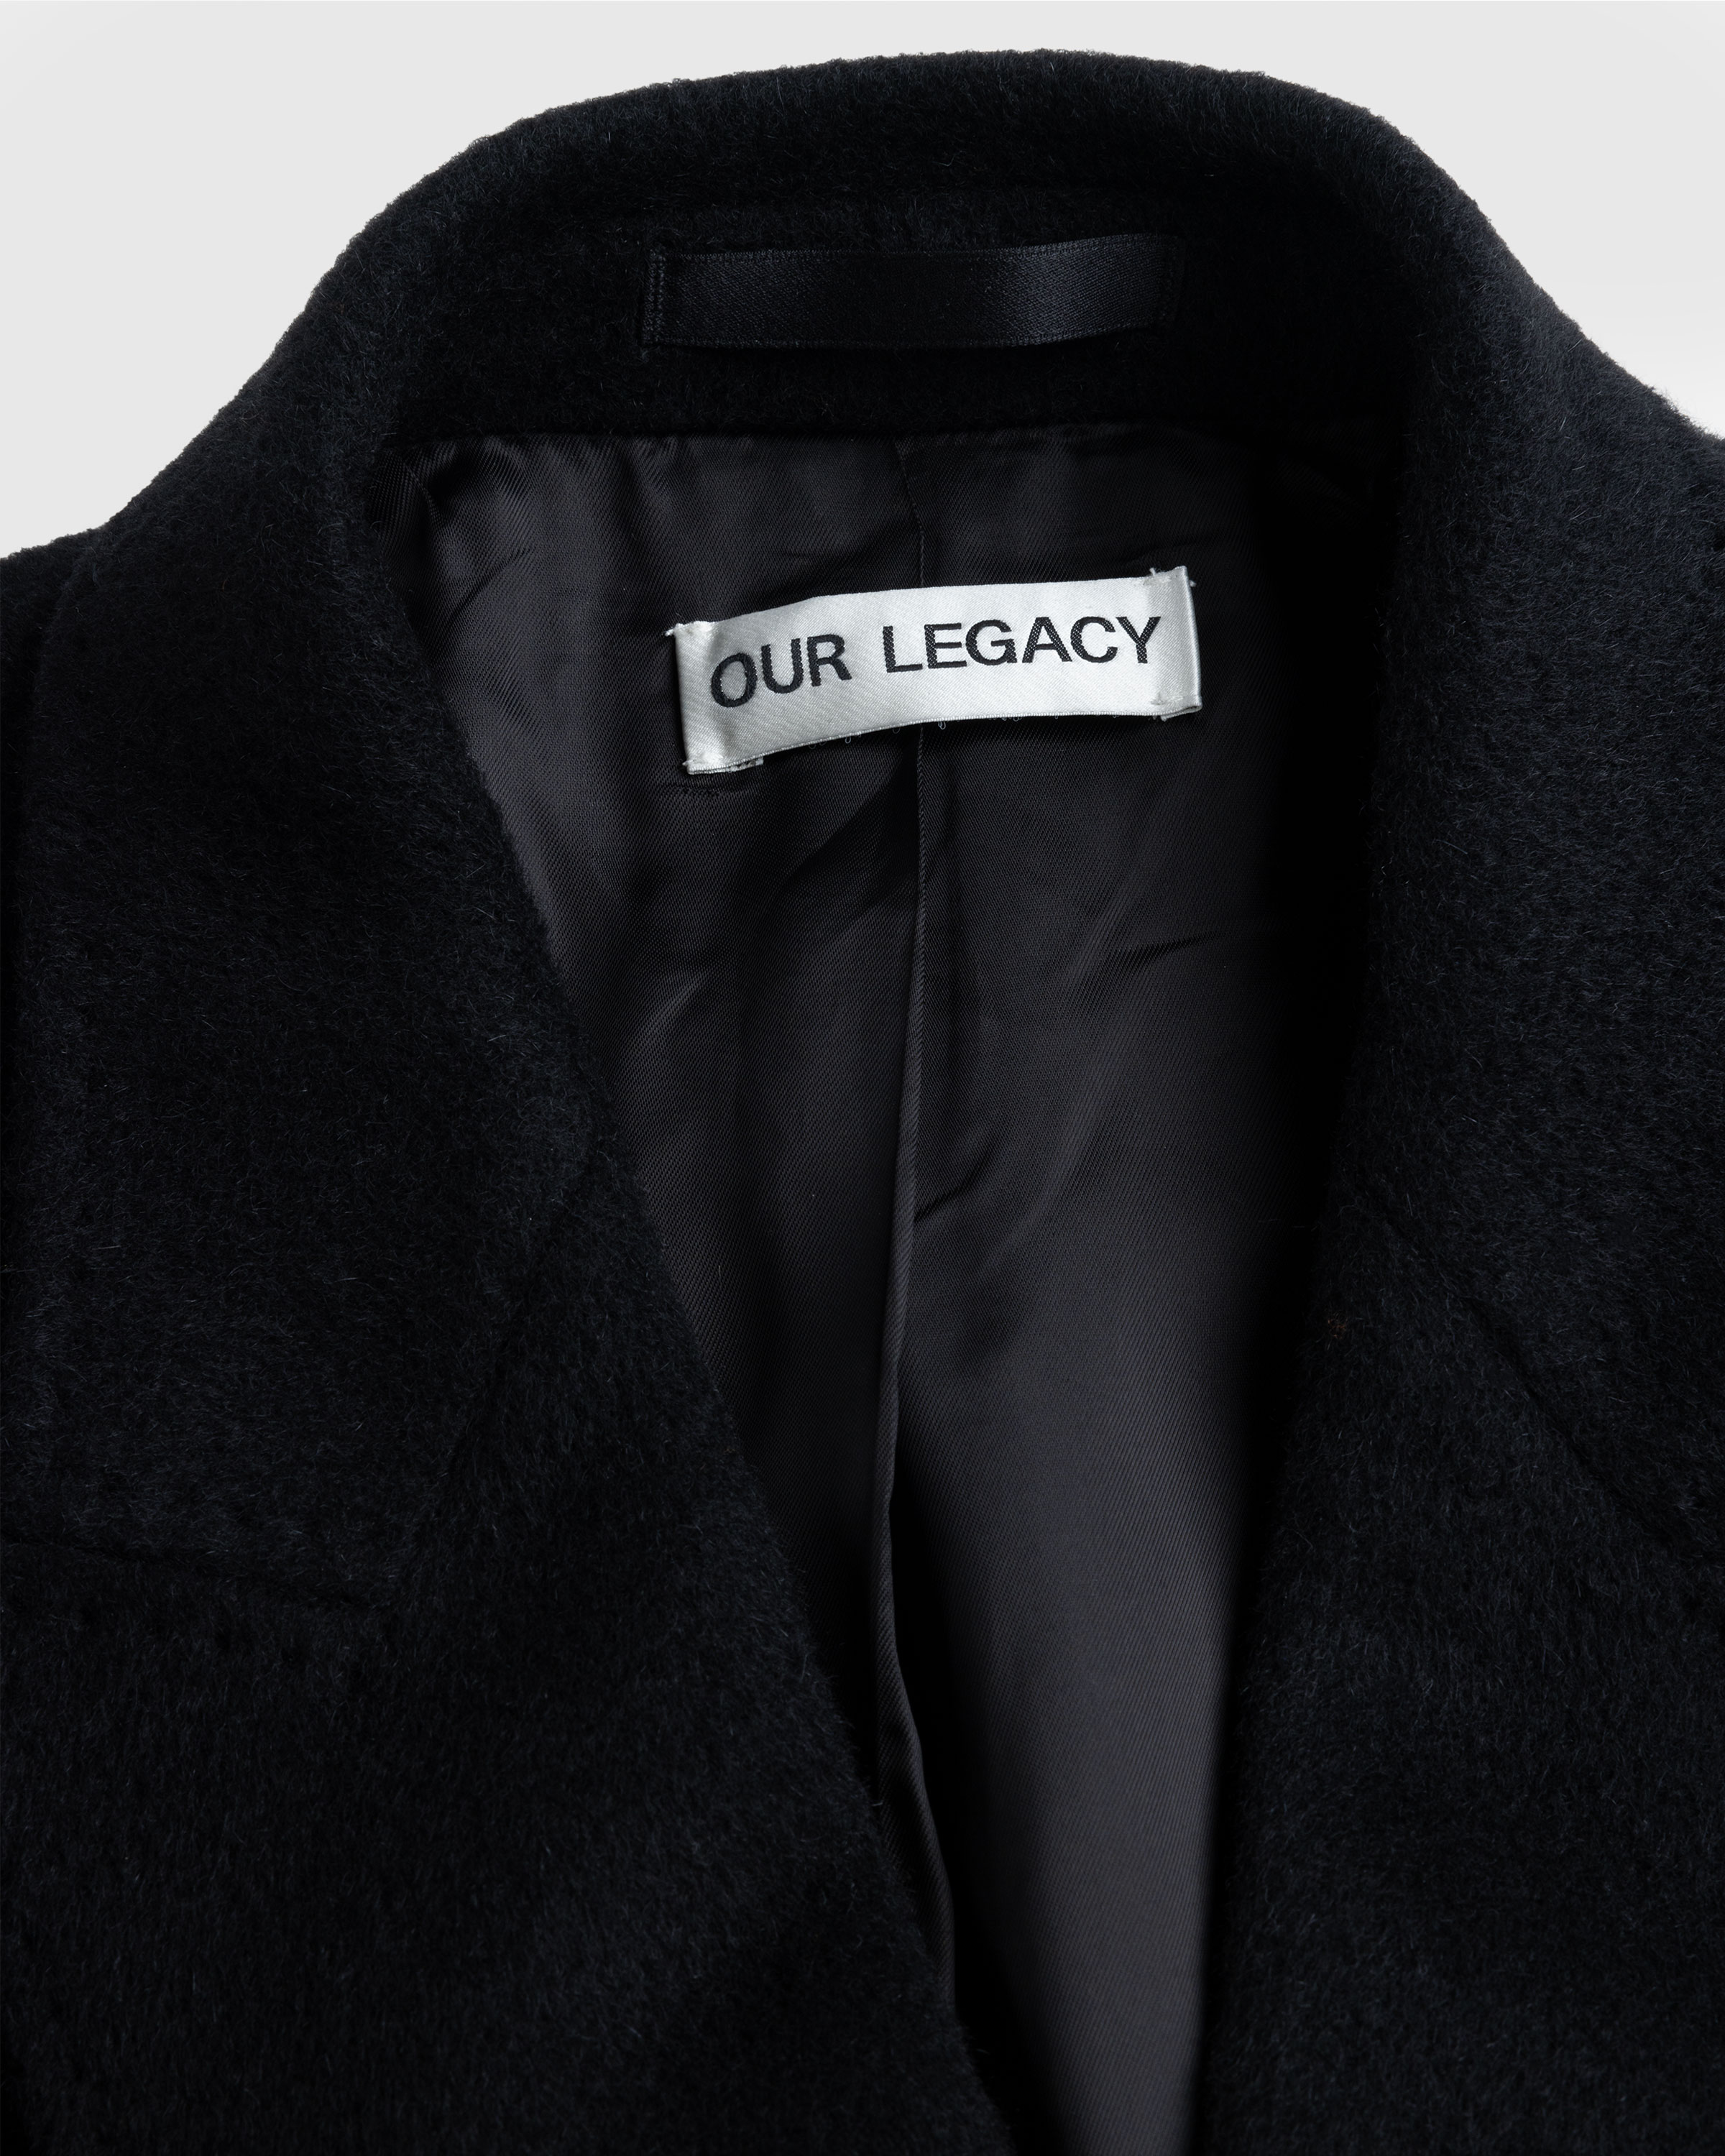 Our Legacy – Whale Coat Black - Overcoats - Black - Image 7